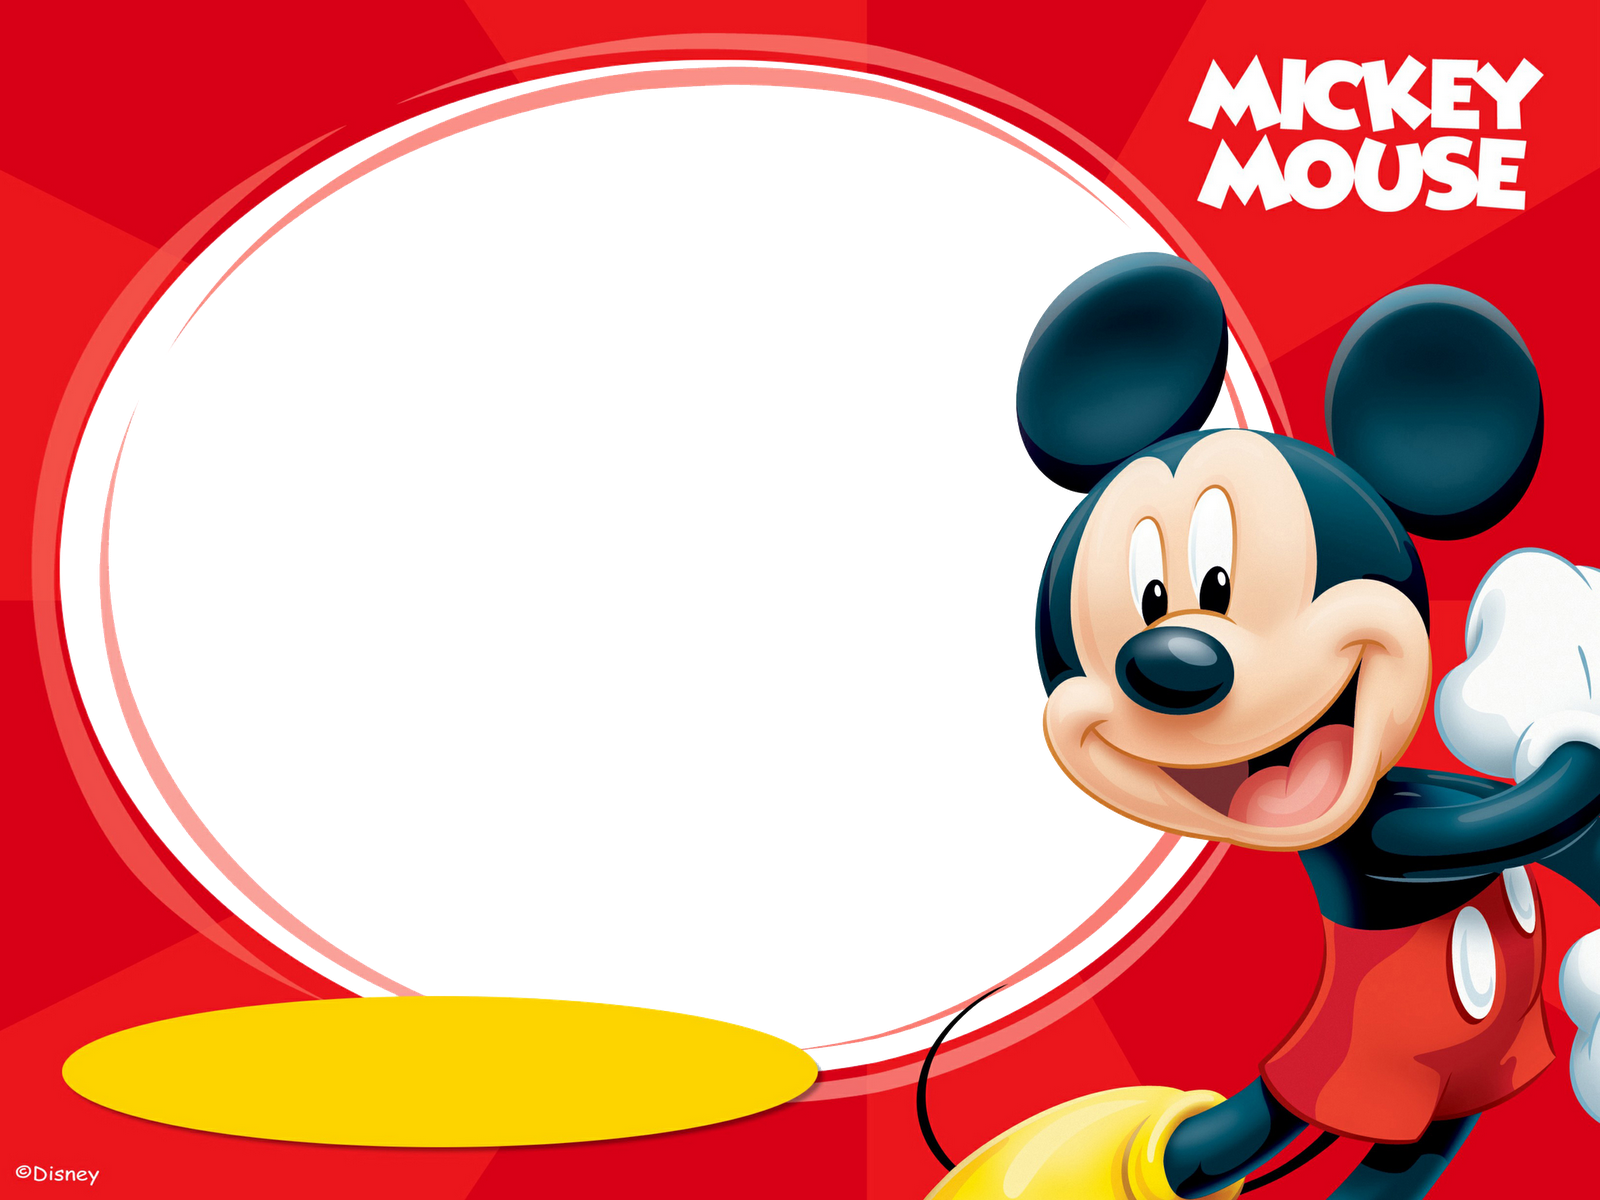 Mickey mouse frame png. Pin by marina on